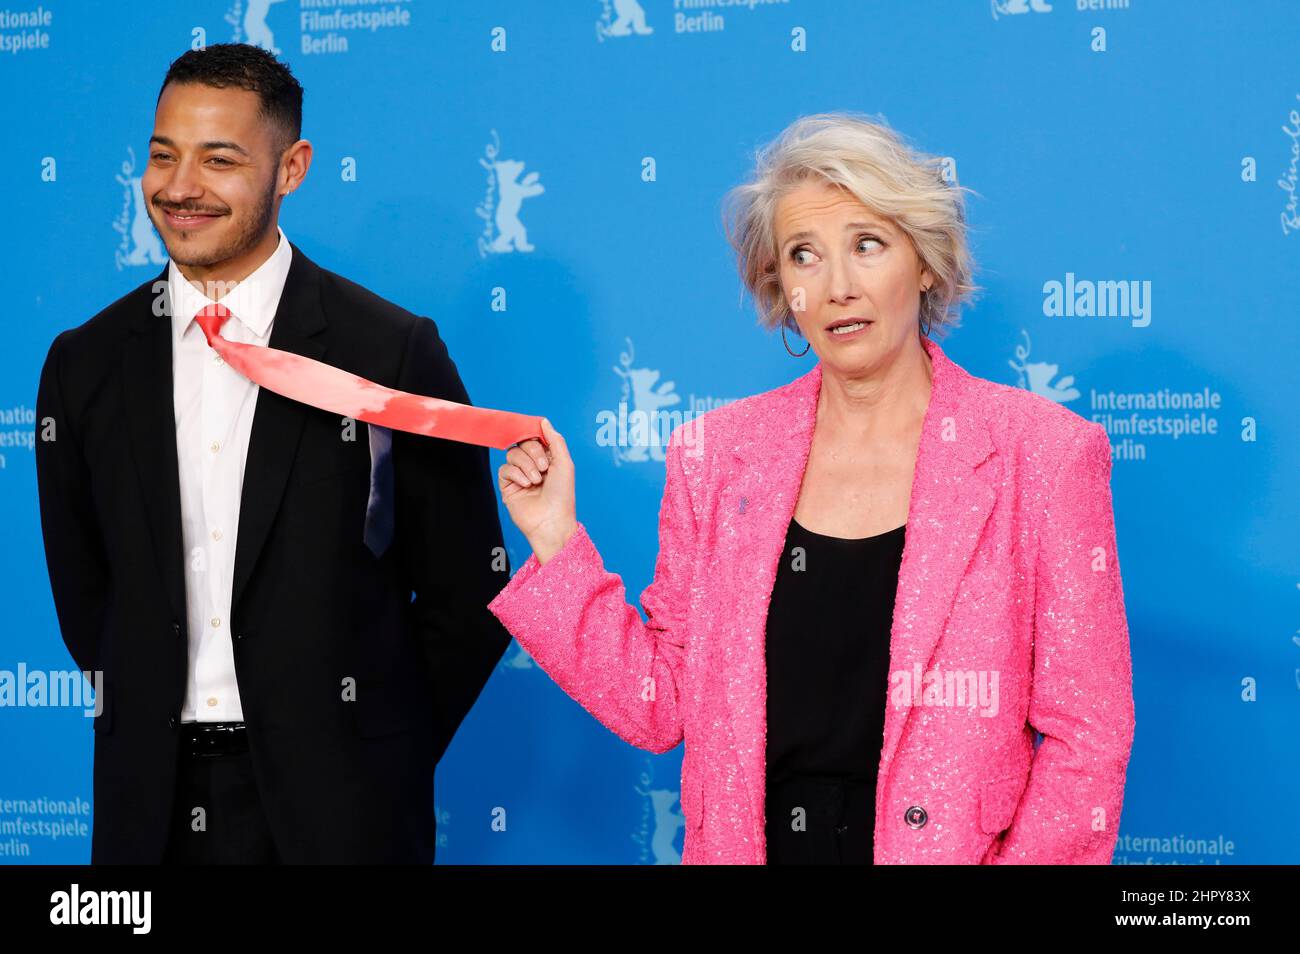 Daryl McCormack and Emma Thompson at the 'Good Luck to You, Leo Grande' photocall during the 72nd Berlinale International Film Festival Berlin at Grand Hyatt Hotel on February 12, 2022 in Berlin, Germany. Stock Photo